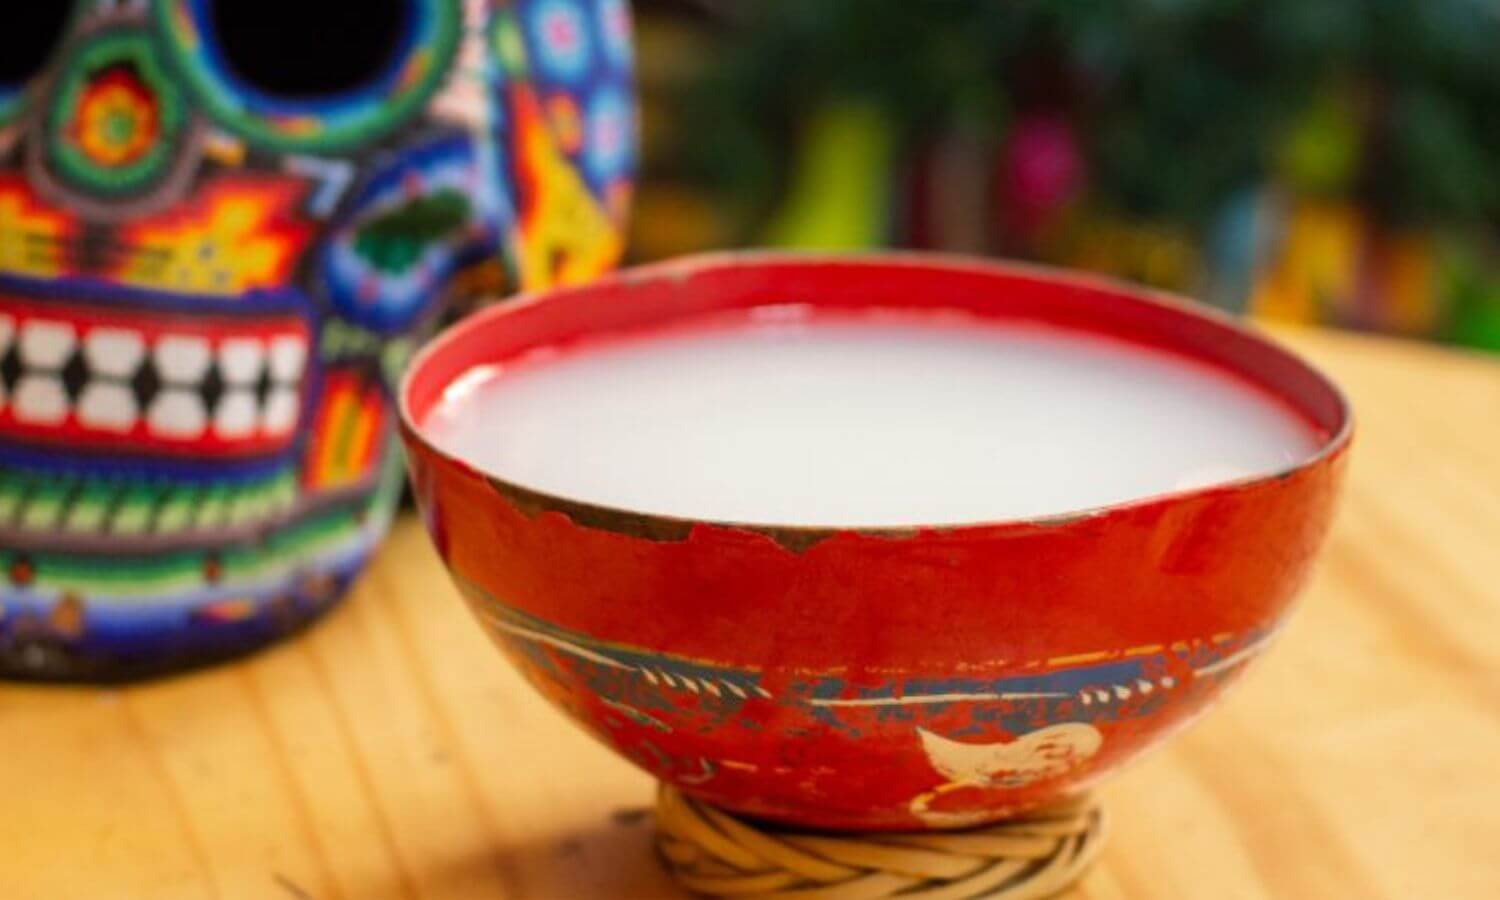 Pulque served in a traditional hand painted gourd.